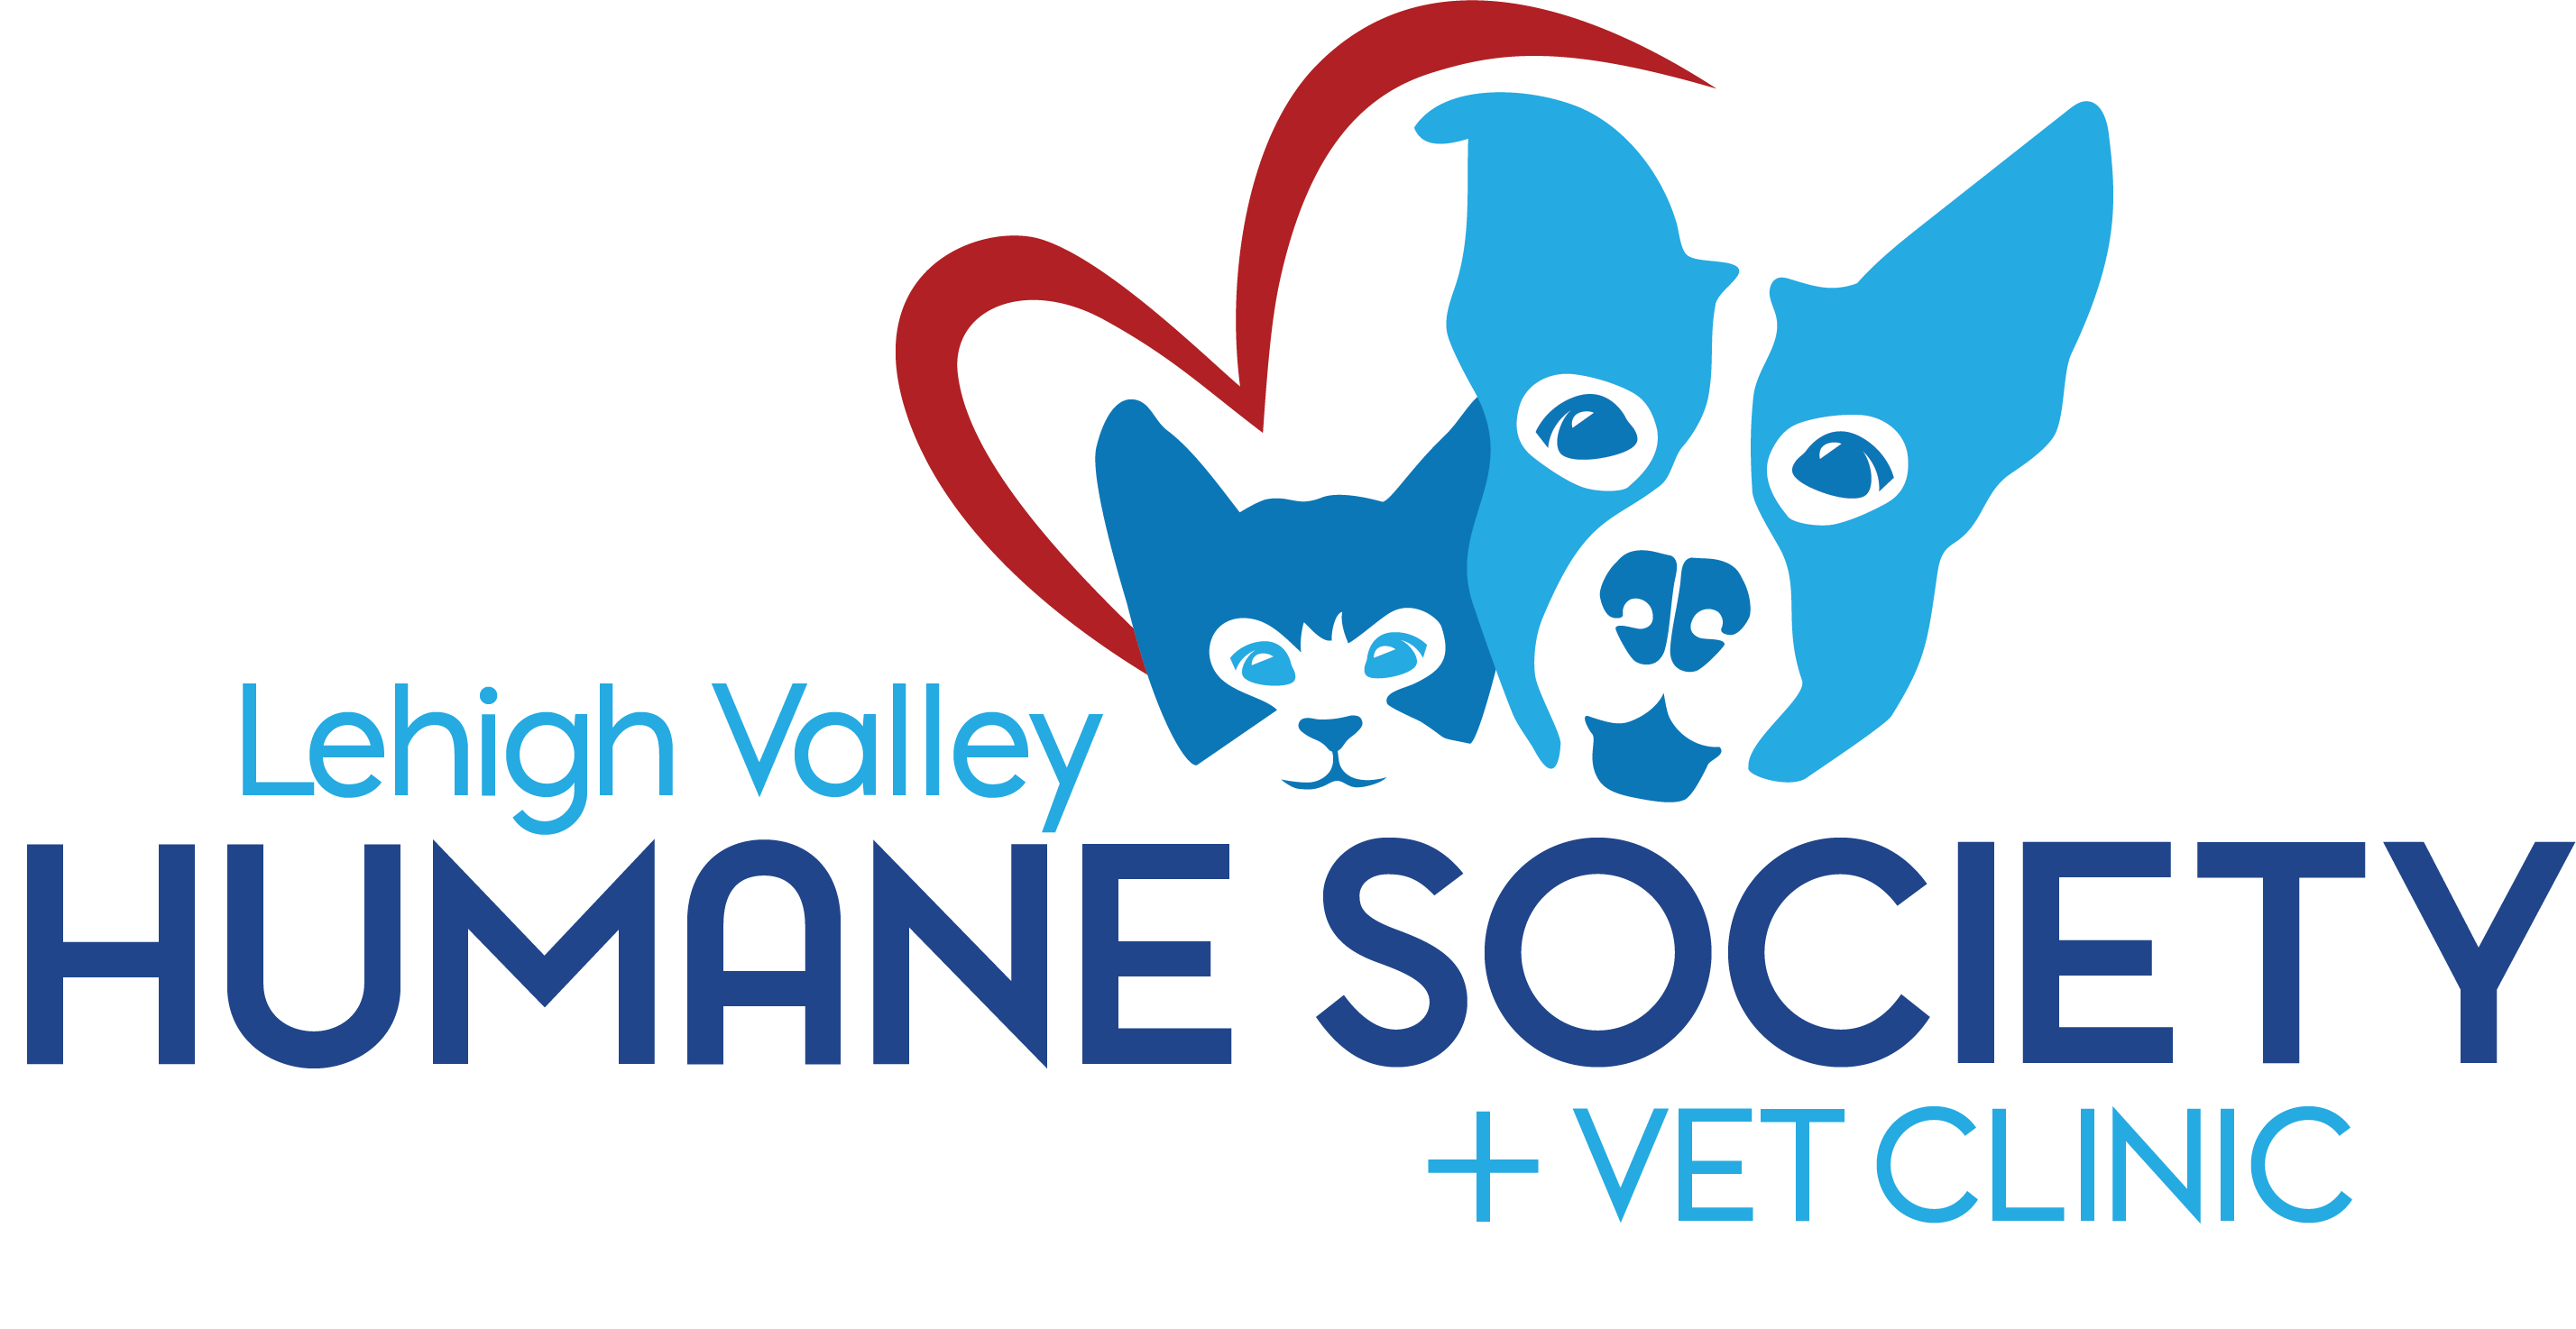 The Lehigh Valley Humane Society and Vet Clinic